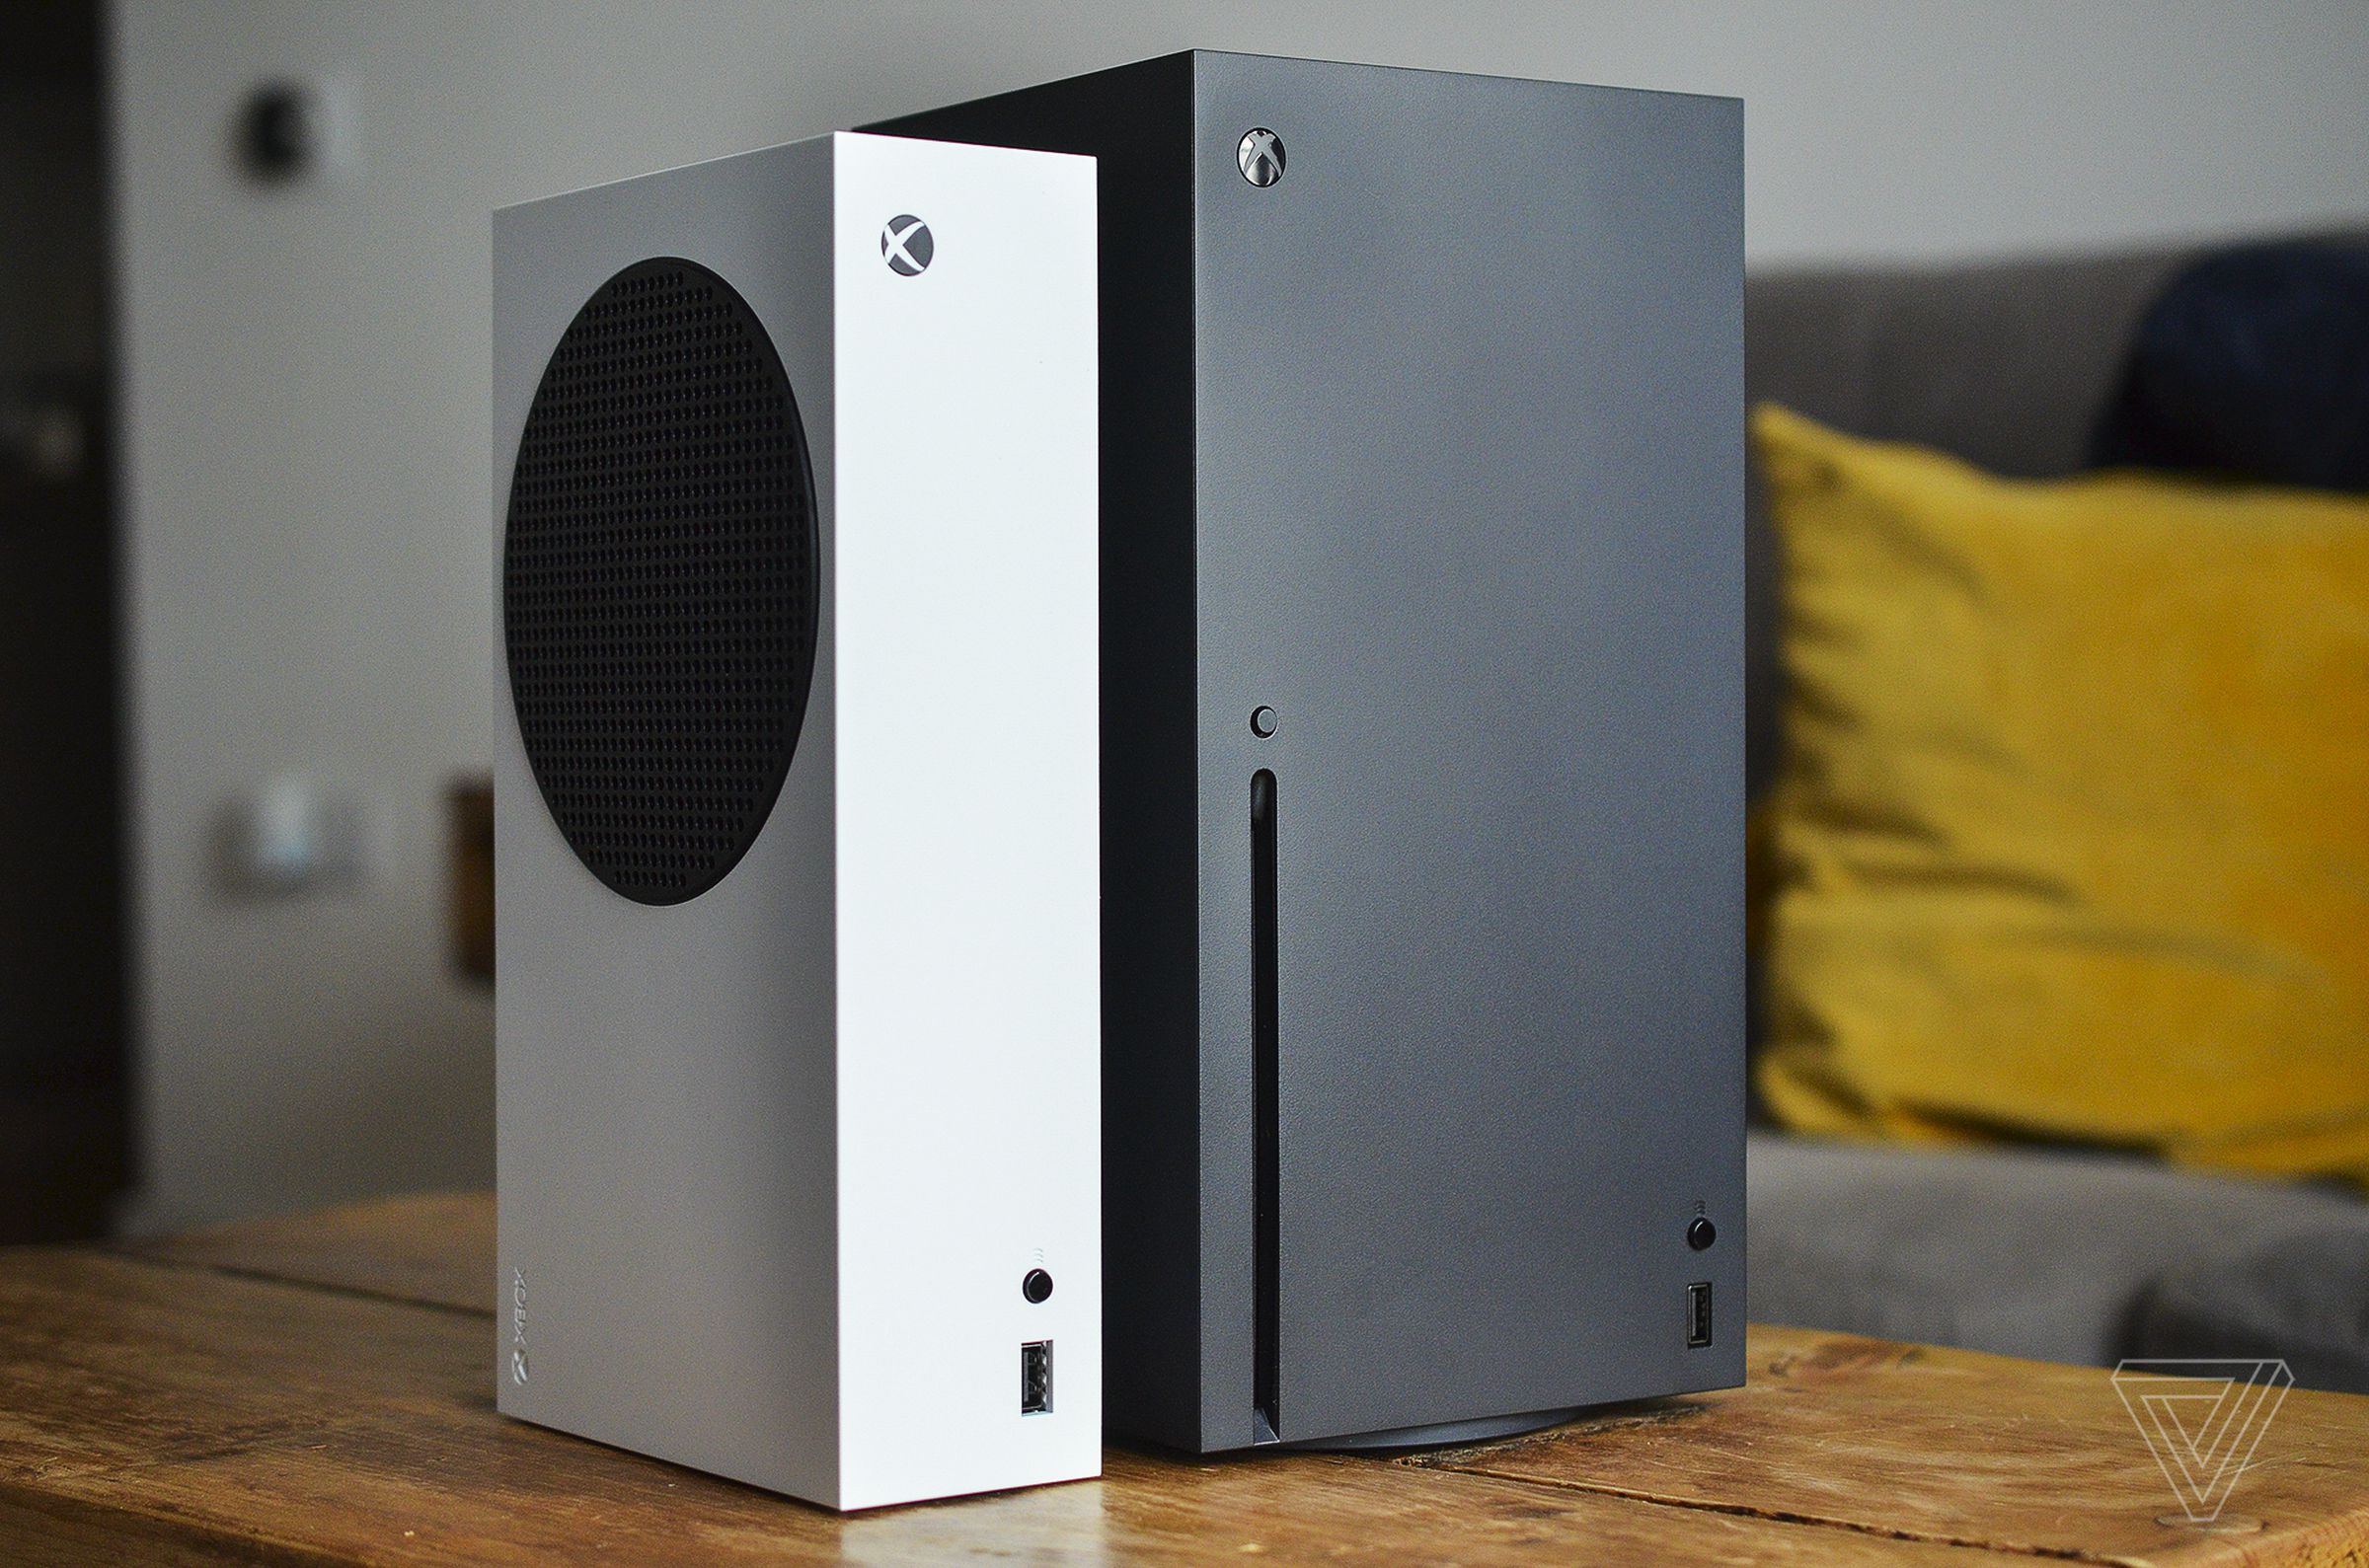 Microsoft's white Xbox Series S sits alongside a larger, black Xbox Series X on a wooden coffee table in a living room